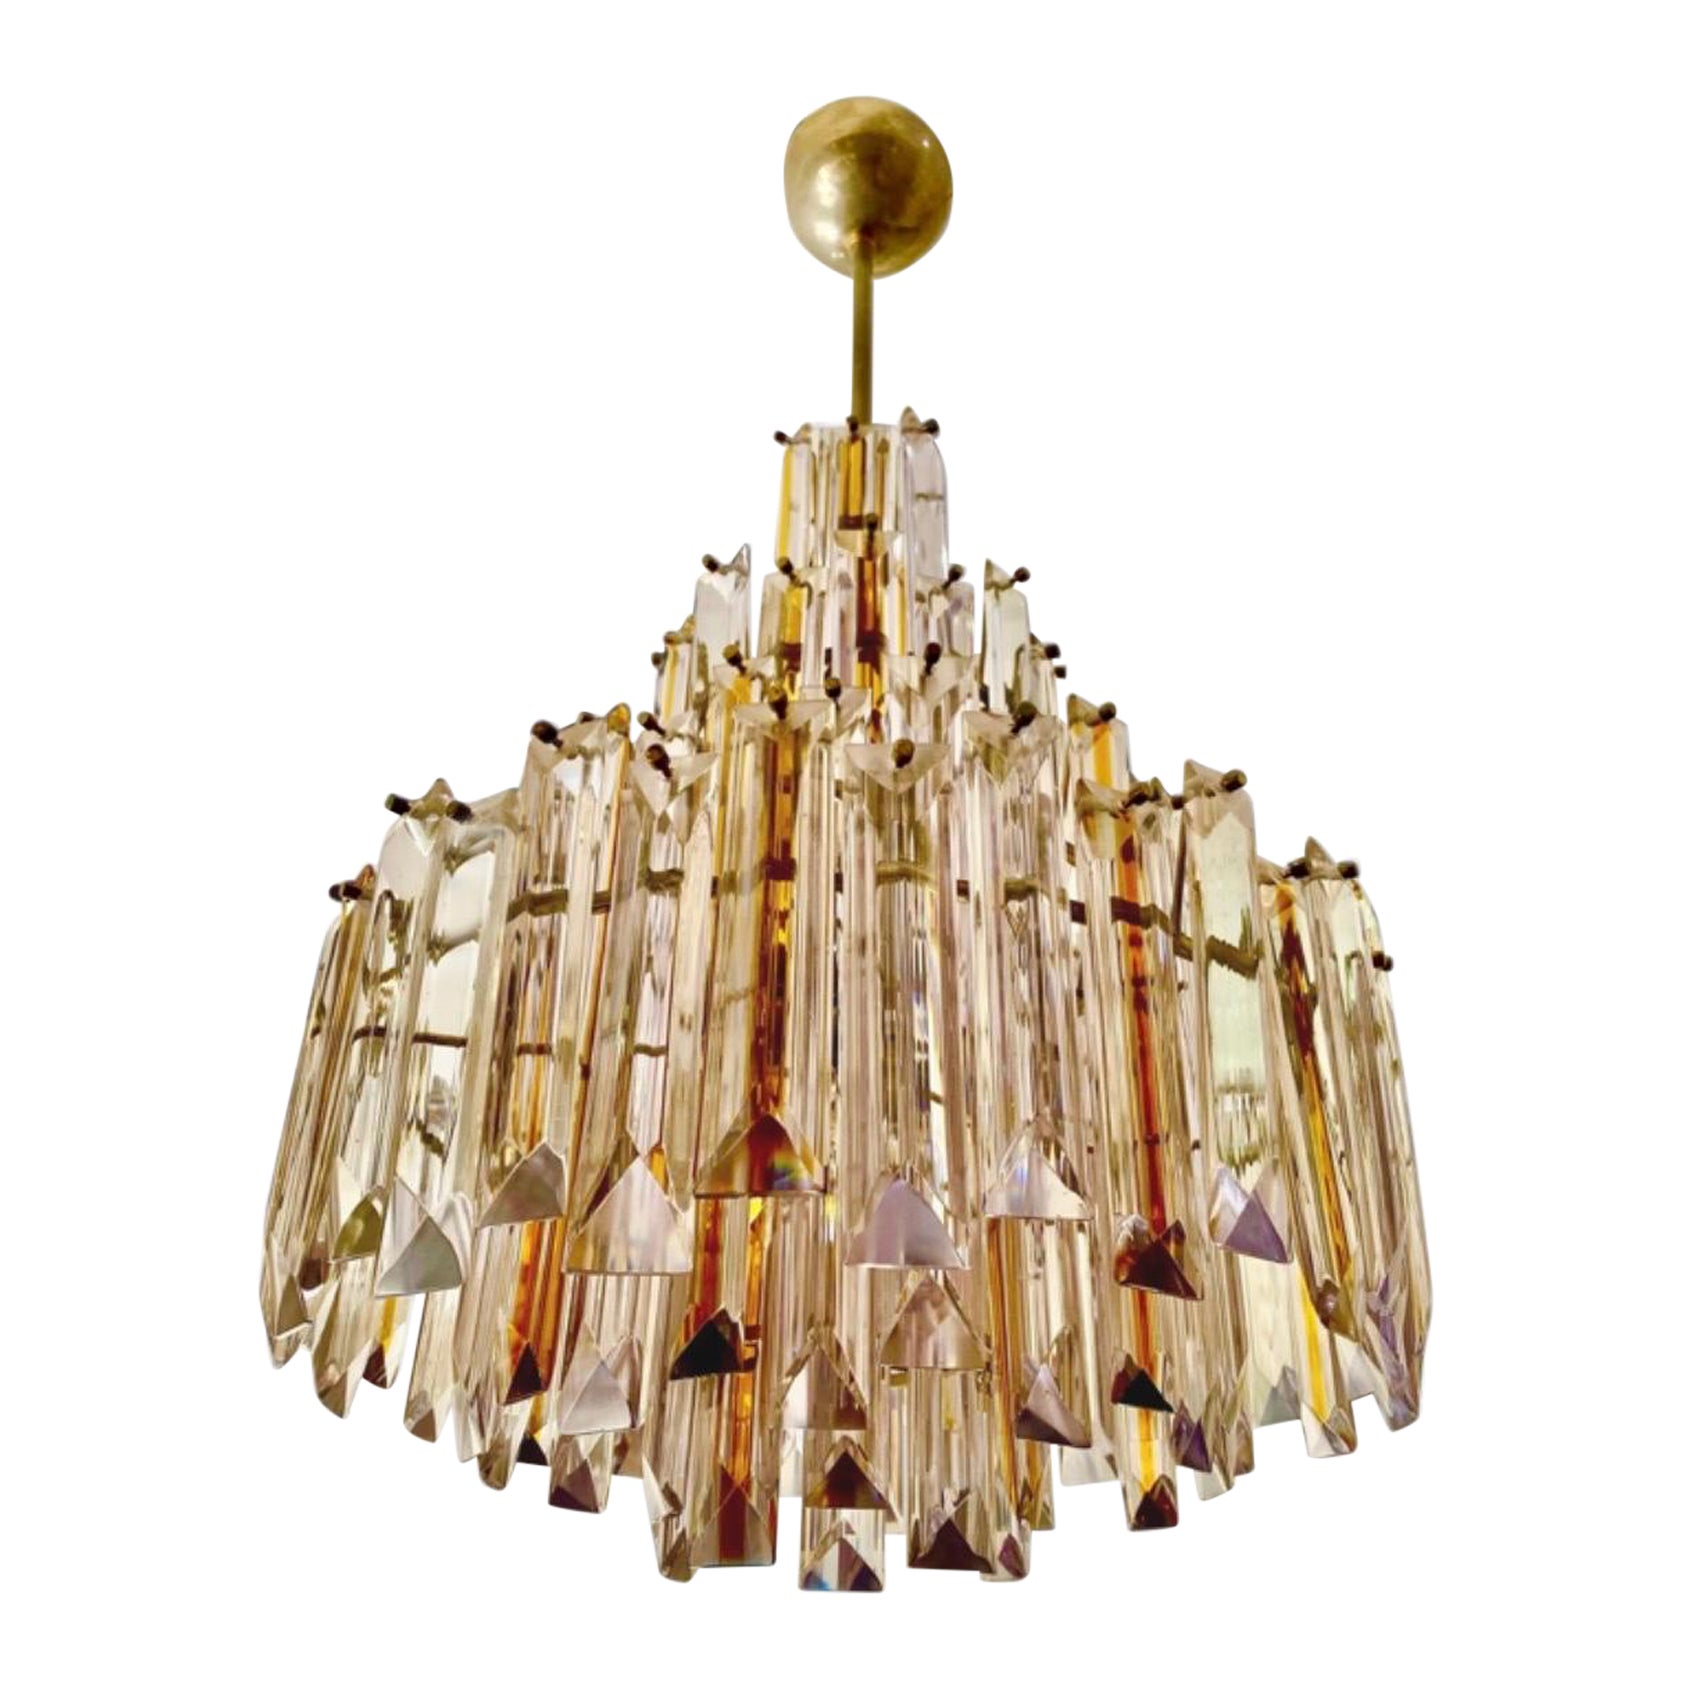 Exceptional Venini chandelier with large Murano glass with gilded gold structure. The design and the quality of the glass make this piece the best of Italian design.
This unique chandelier by Venini in murano glass is exceptional.
discount shipping